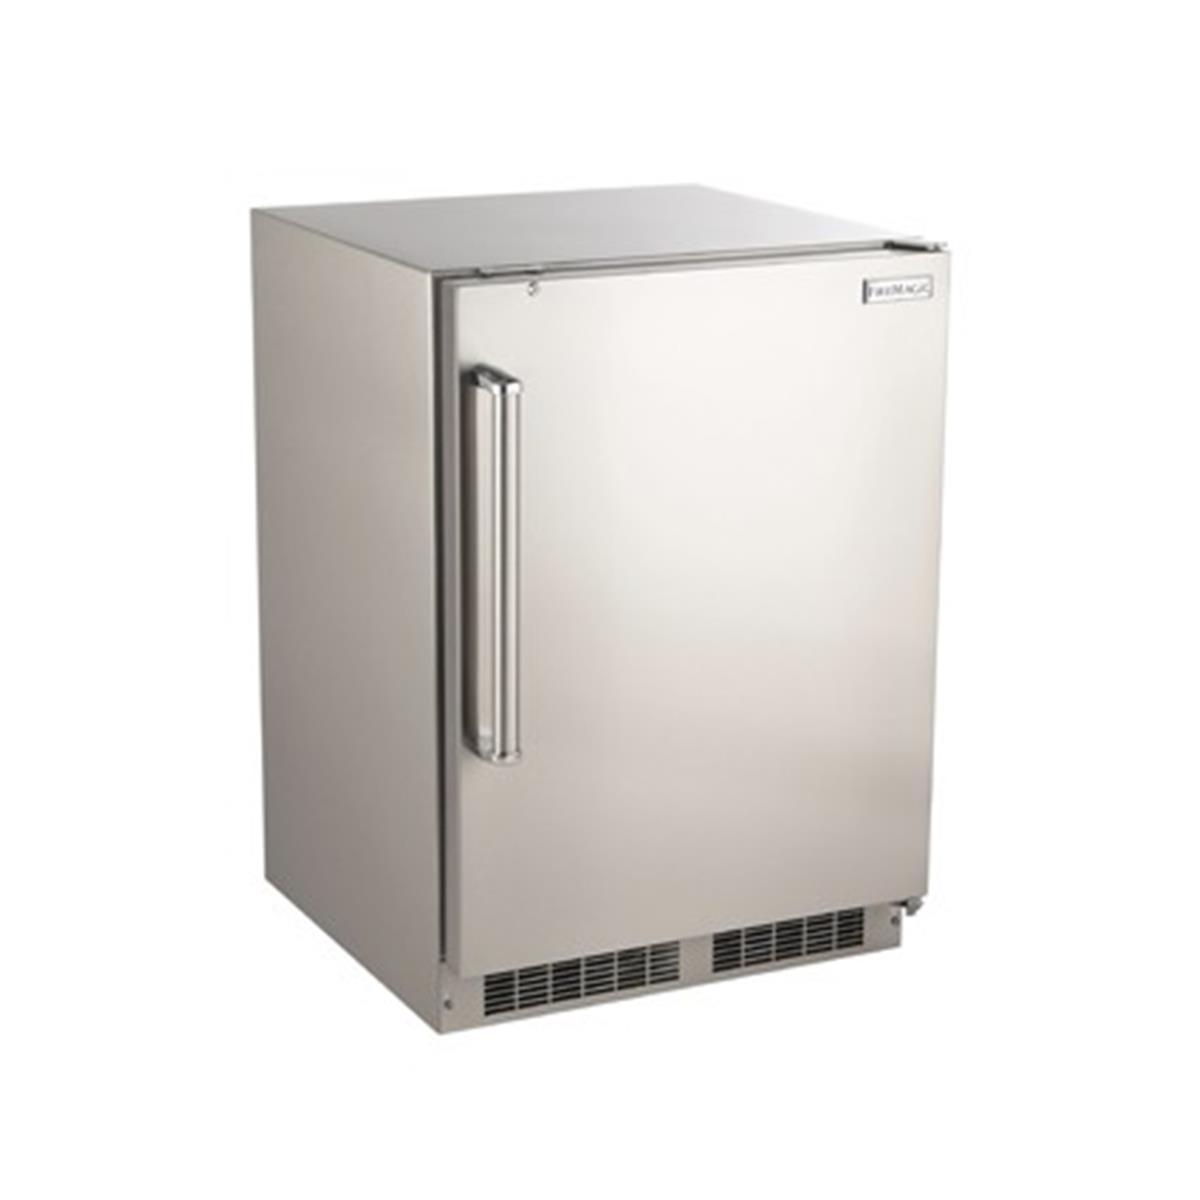 Picture of Fire Magic 3589-DL Outdoor Rated Refrigerator with Left Door Hinge